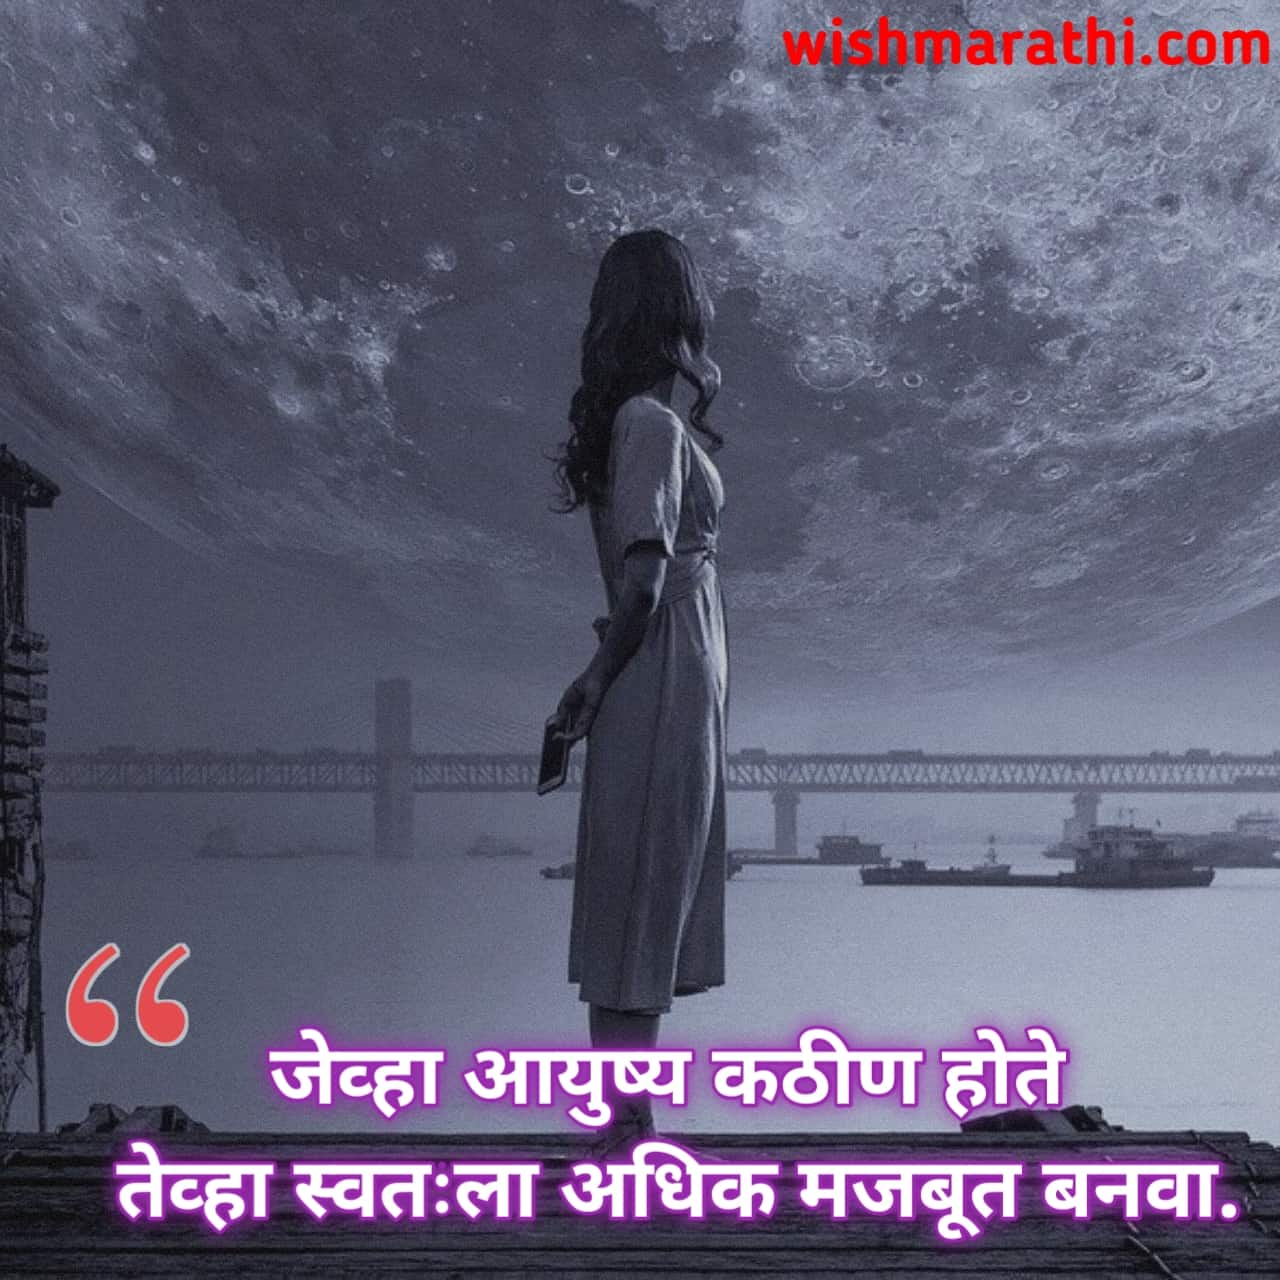 Marathi inspirational and motivational quotes on life challenges,